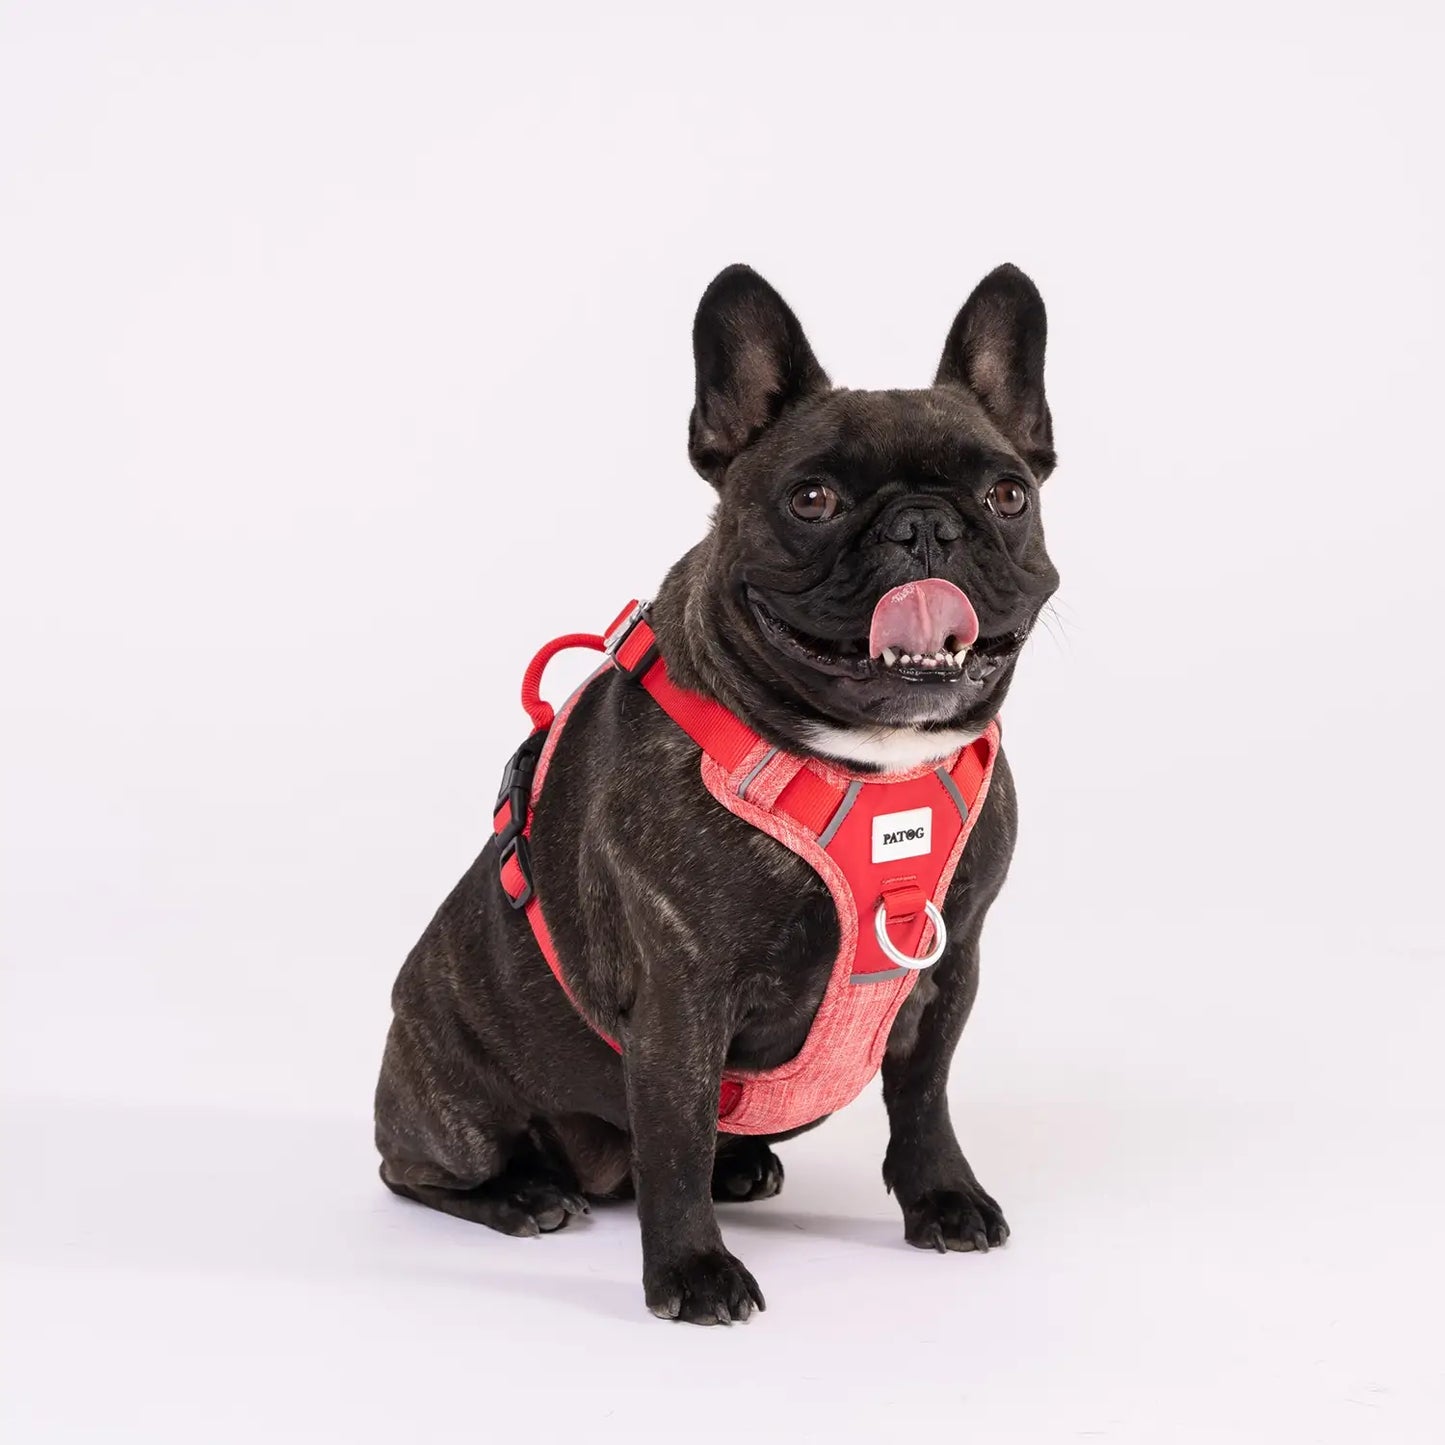 Patog's French Bulldog model wearing size small red colour harness. Durable and stylish harness.